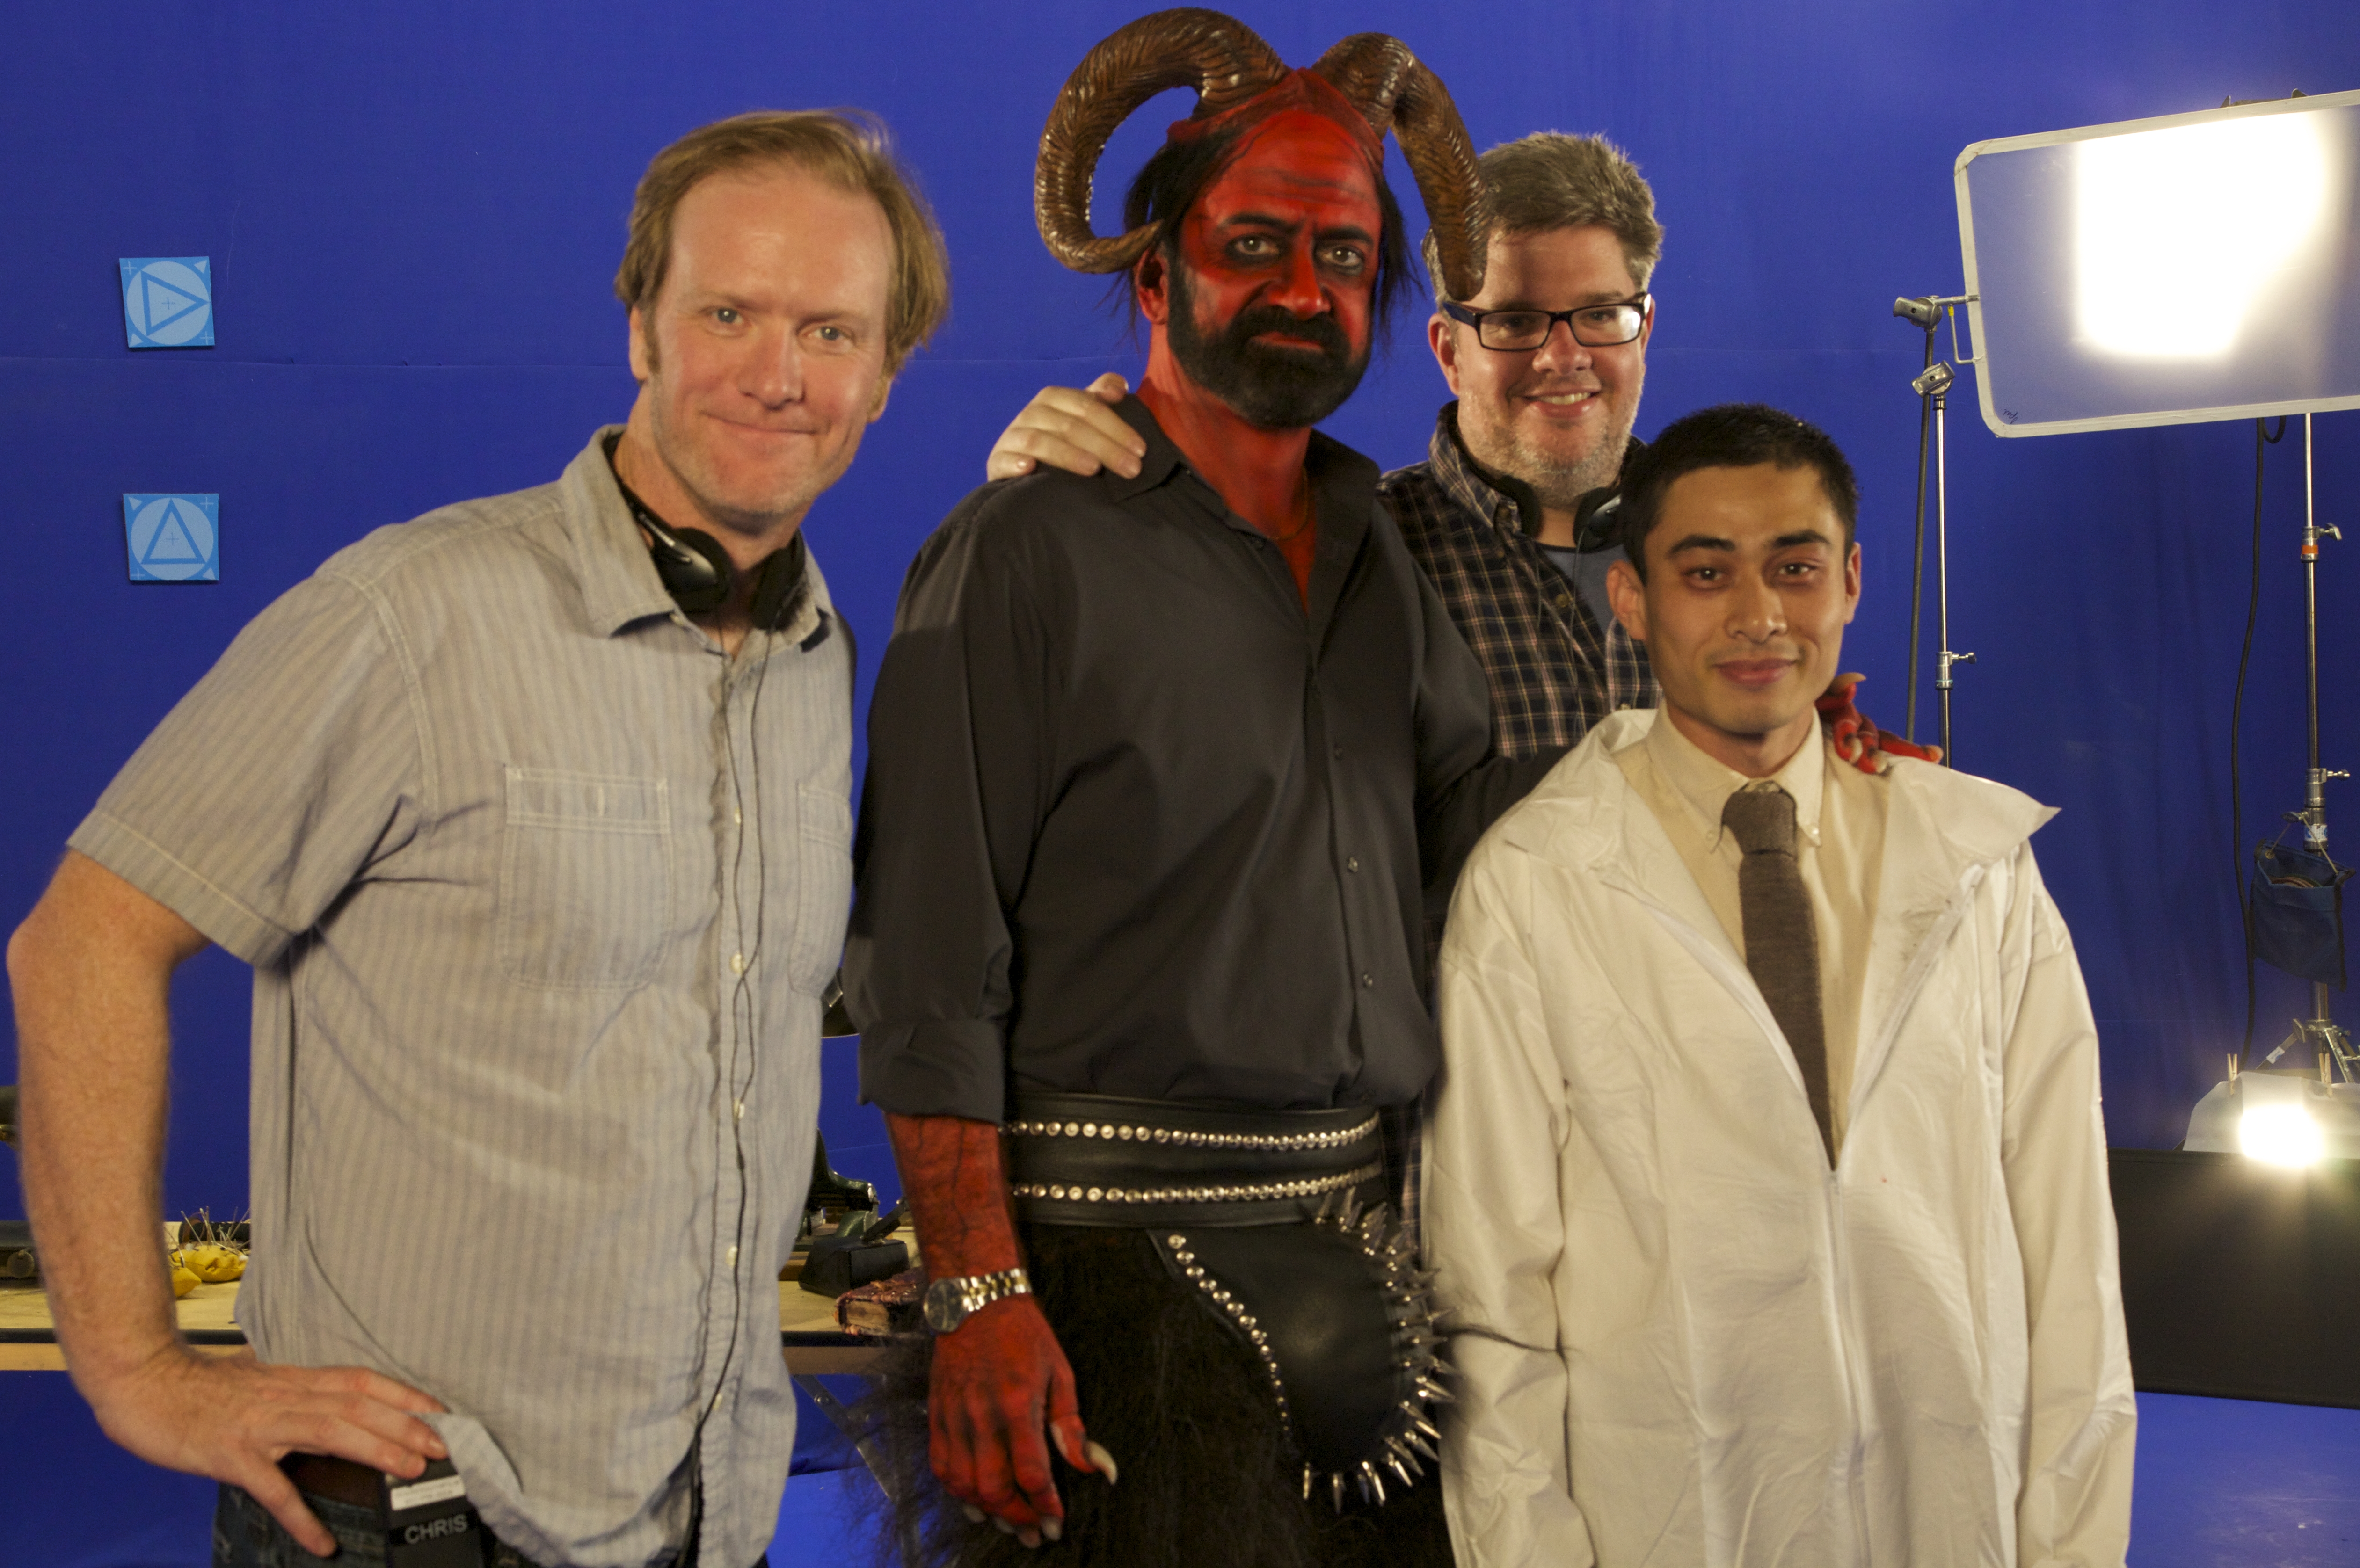 Dave Willis, Matt Servitto, Chris Casper Kelly, and William Ngo on the set of Adult Swim's Your Pretty Face is Going to Hell